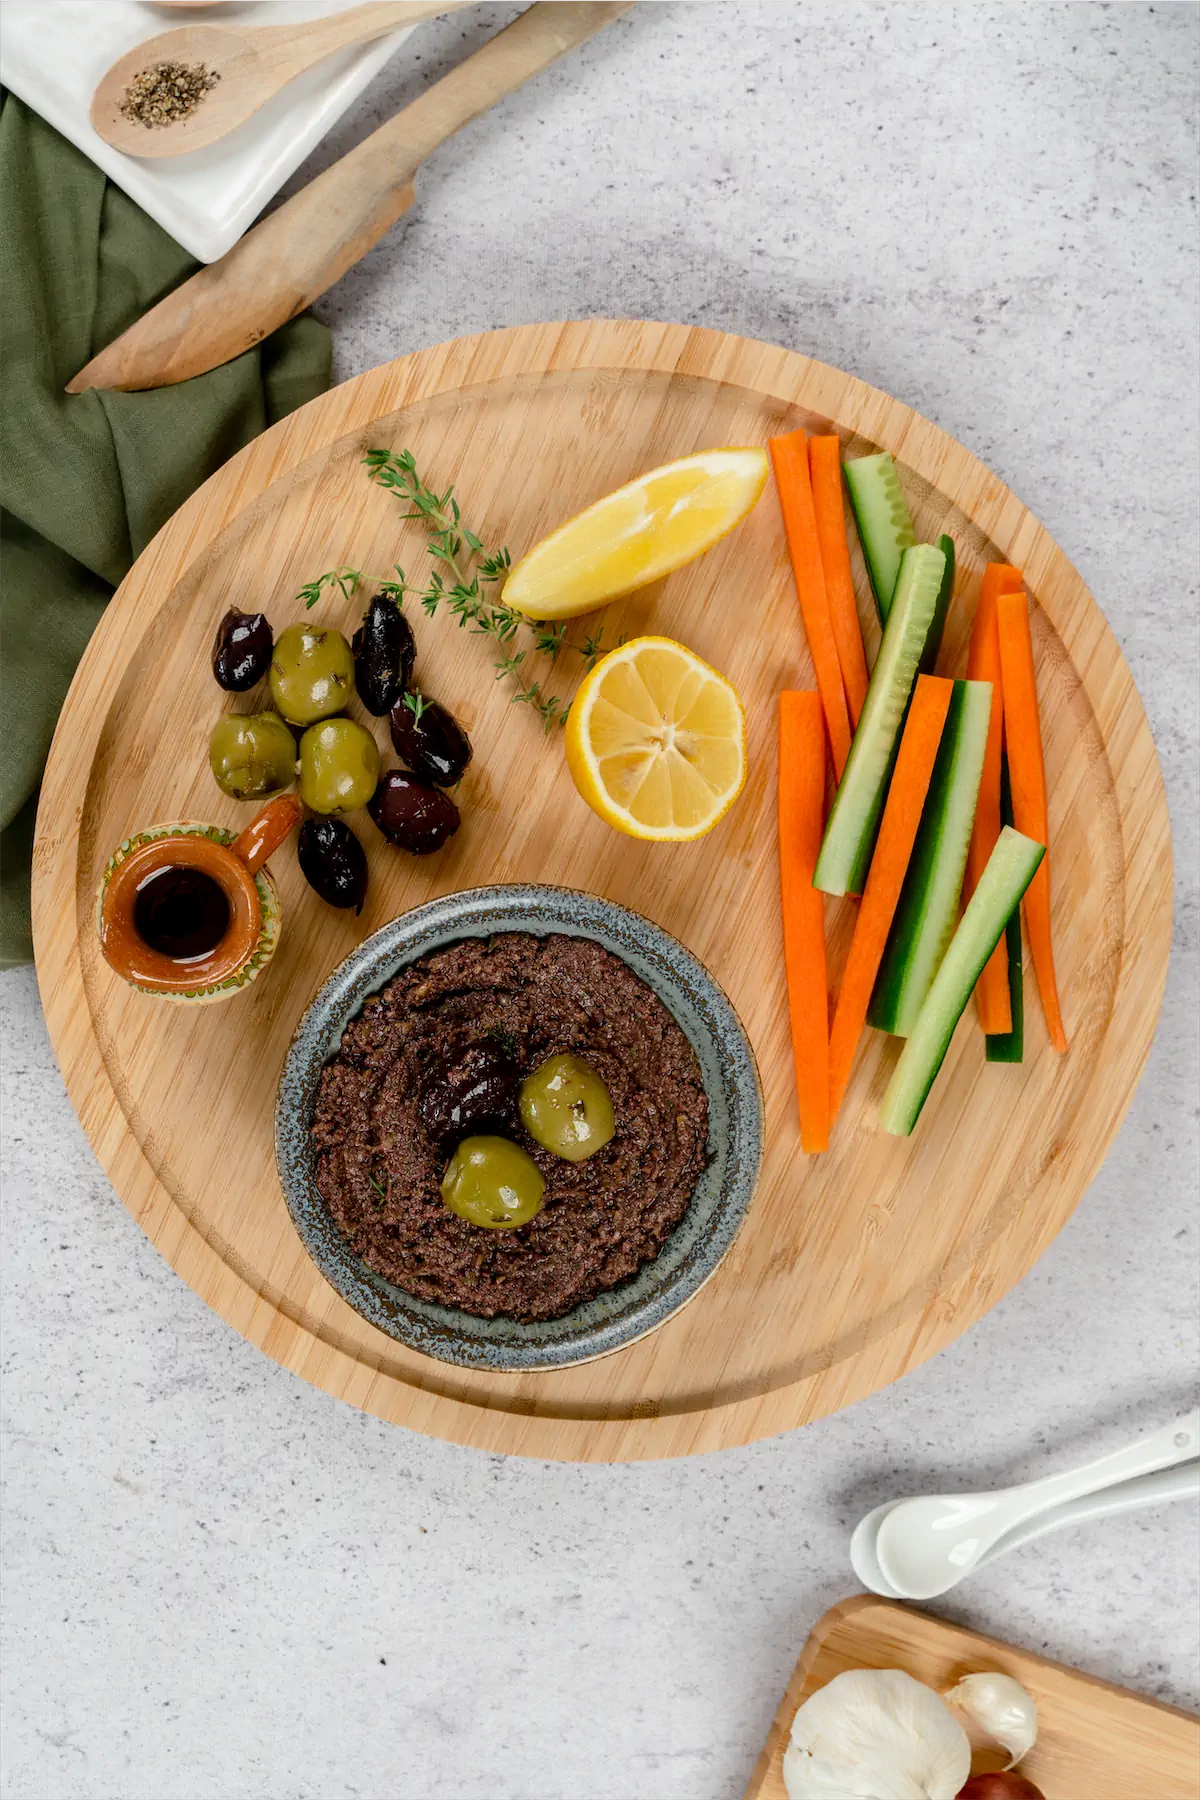 Classic Olive Tapenade served on a plate along with some olives, capers, sliced radish, sliced cucumbers and lemon.